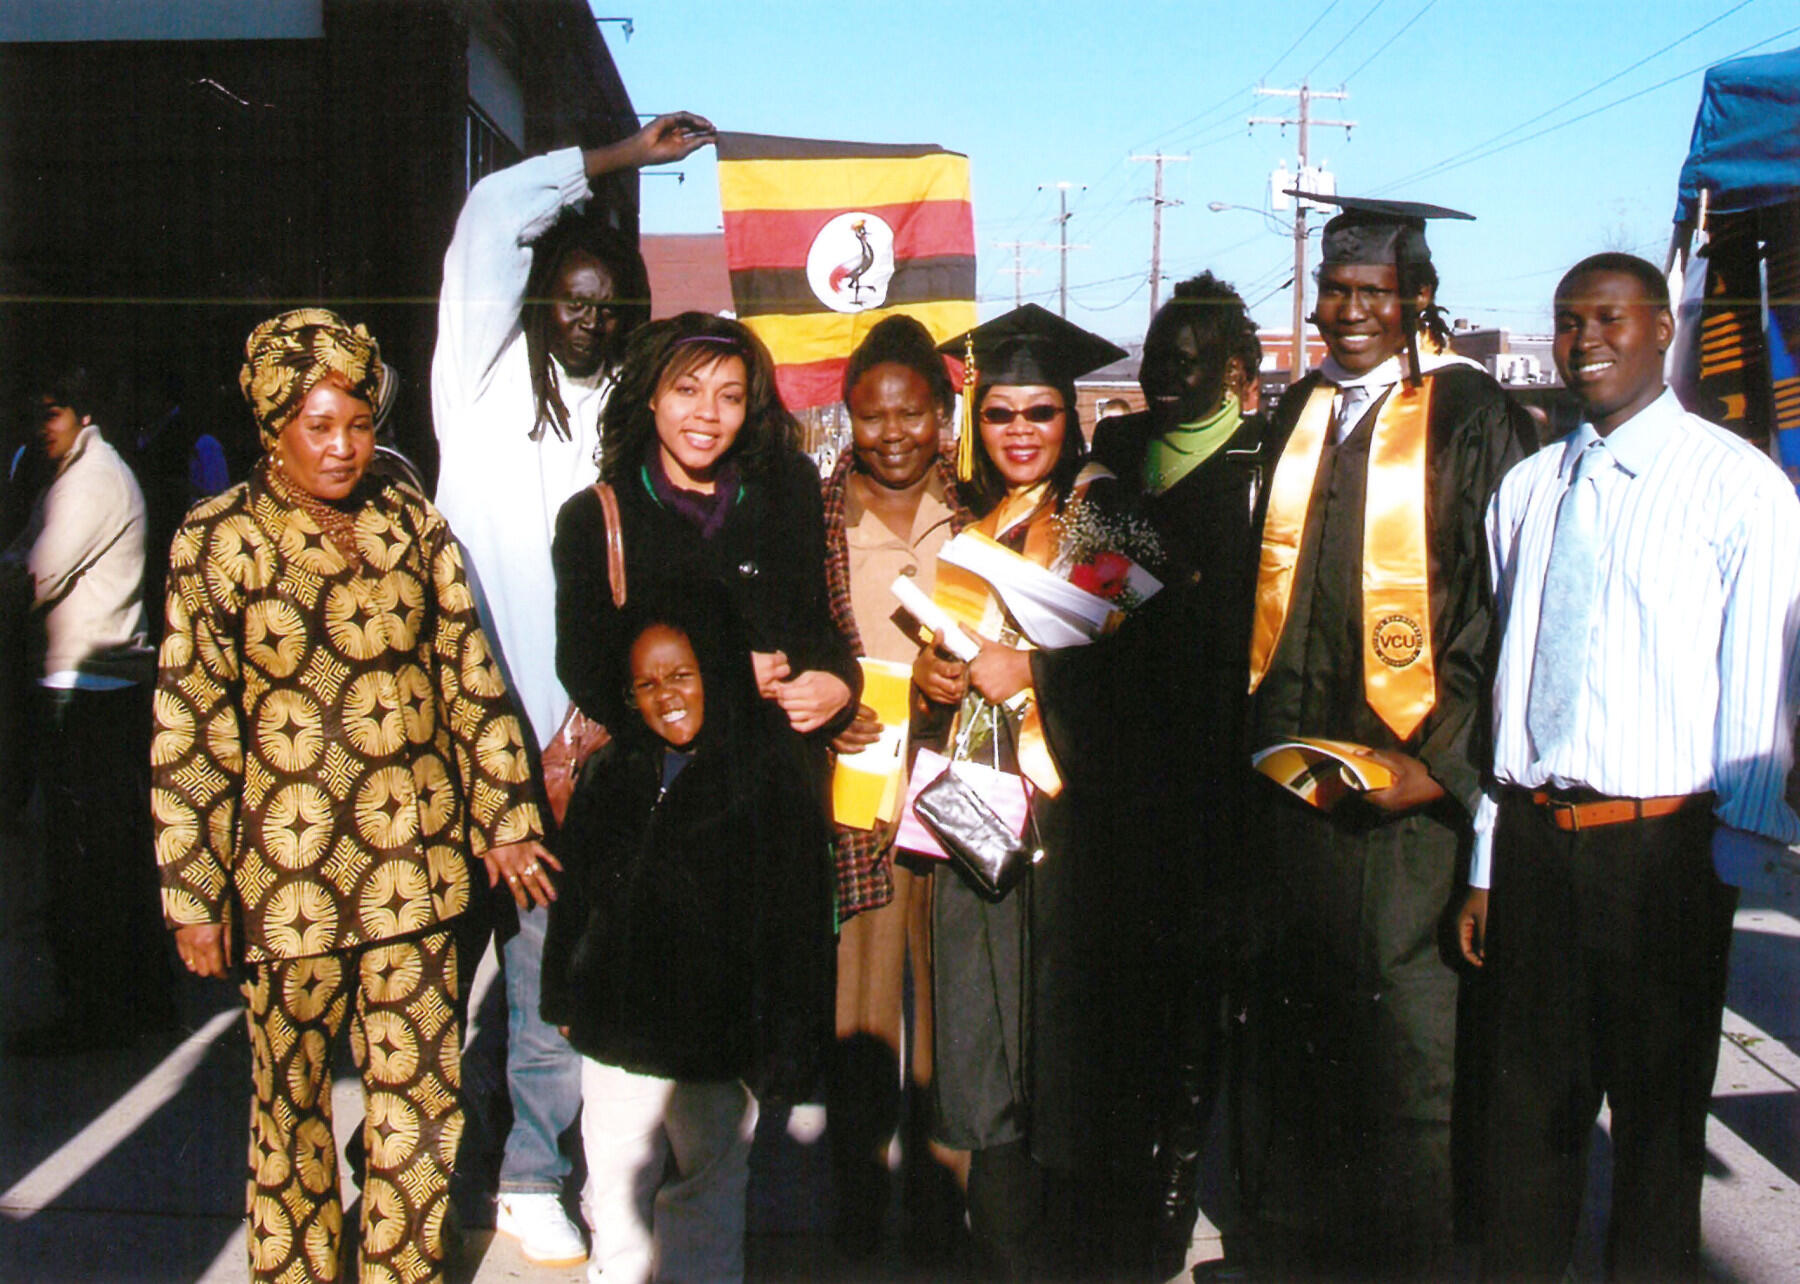 A group of people in dress clothes and graduation robes stands outside. One man holds a red, yellow and black (Ugandan) flag.